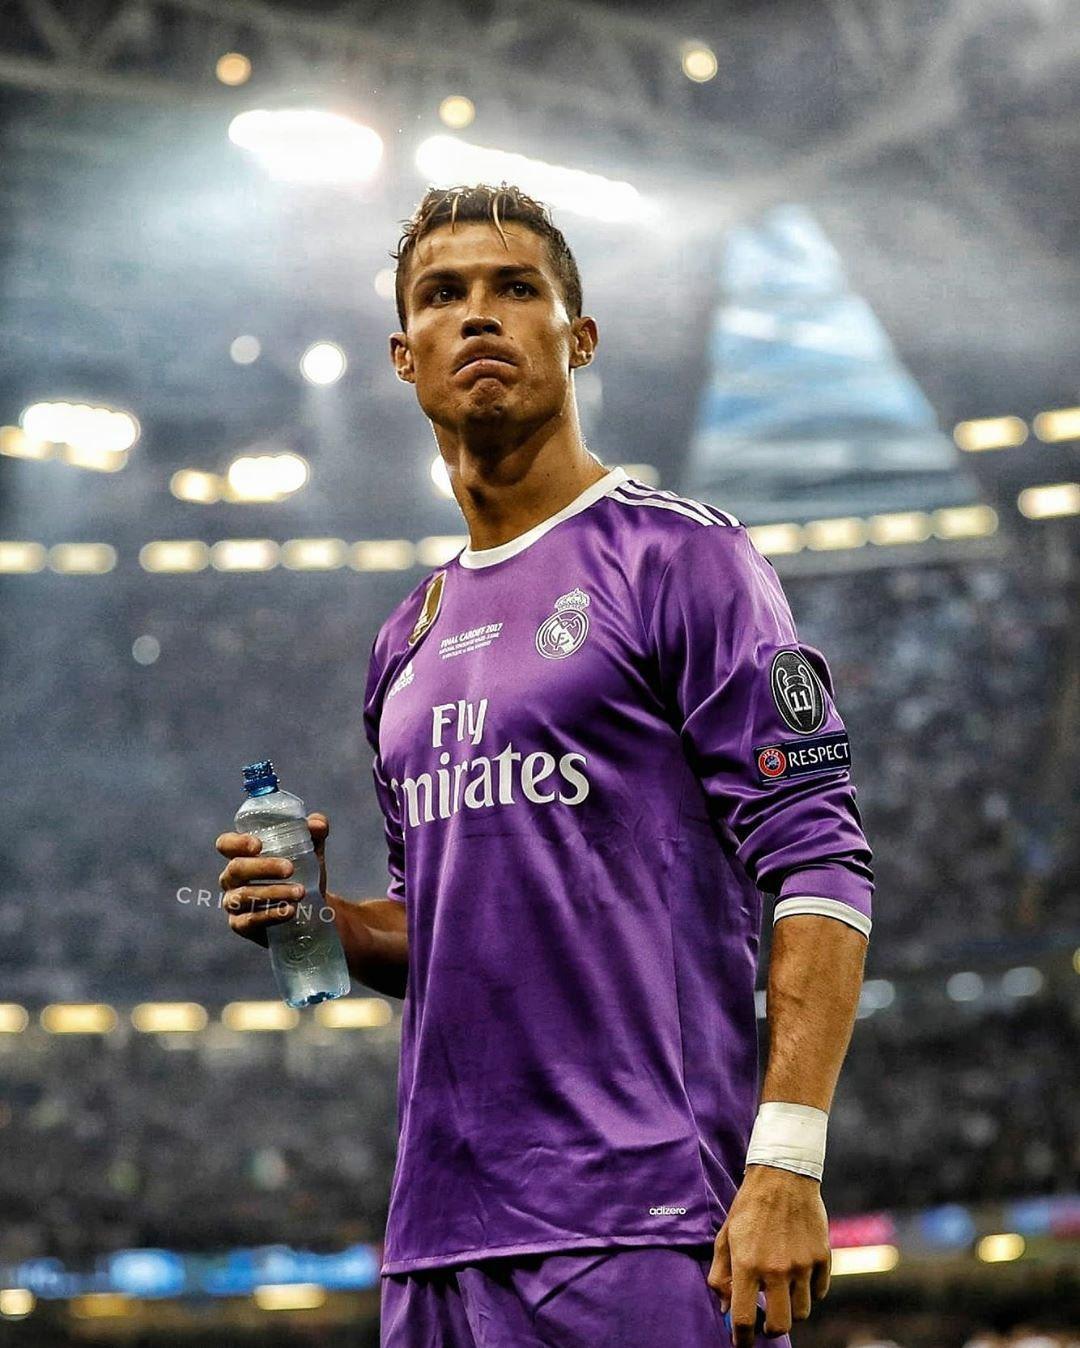 The Cr7 Timeline On X Cristiano Ronaldo With Real Madrid